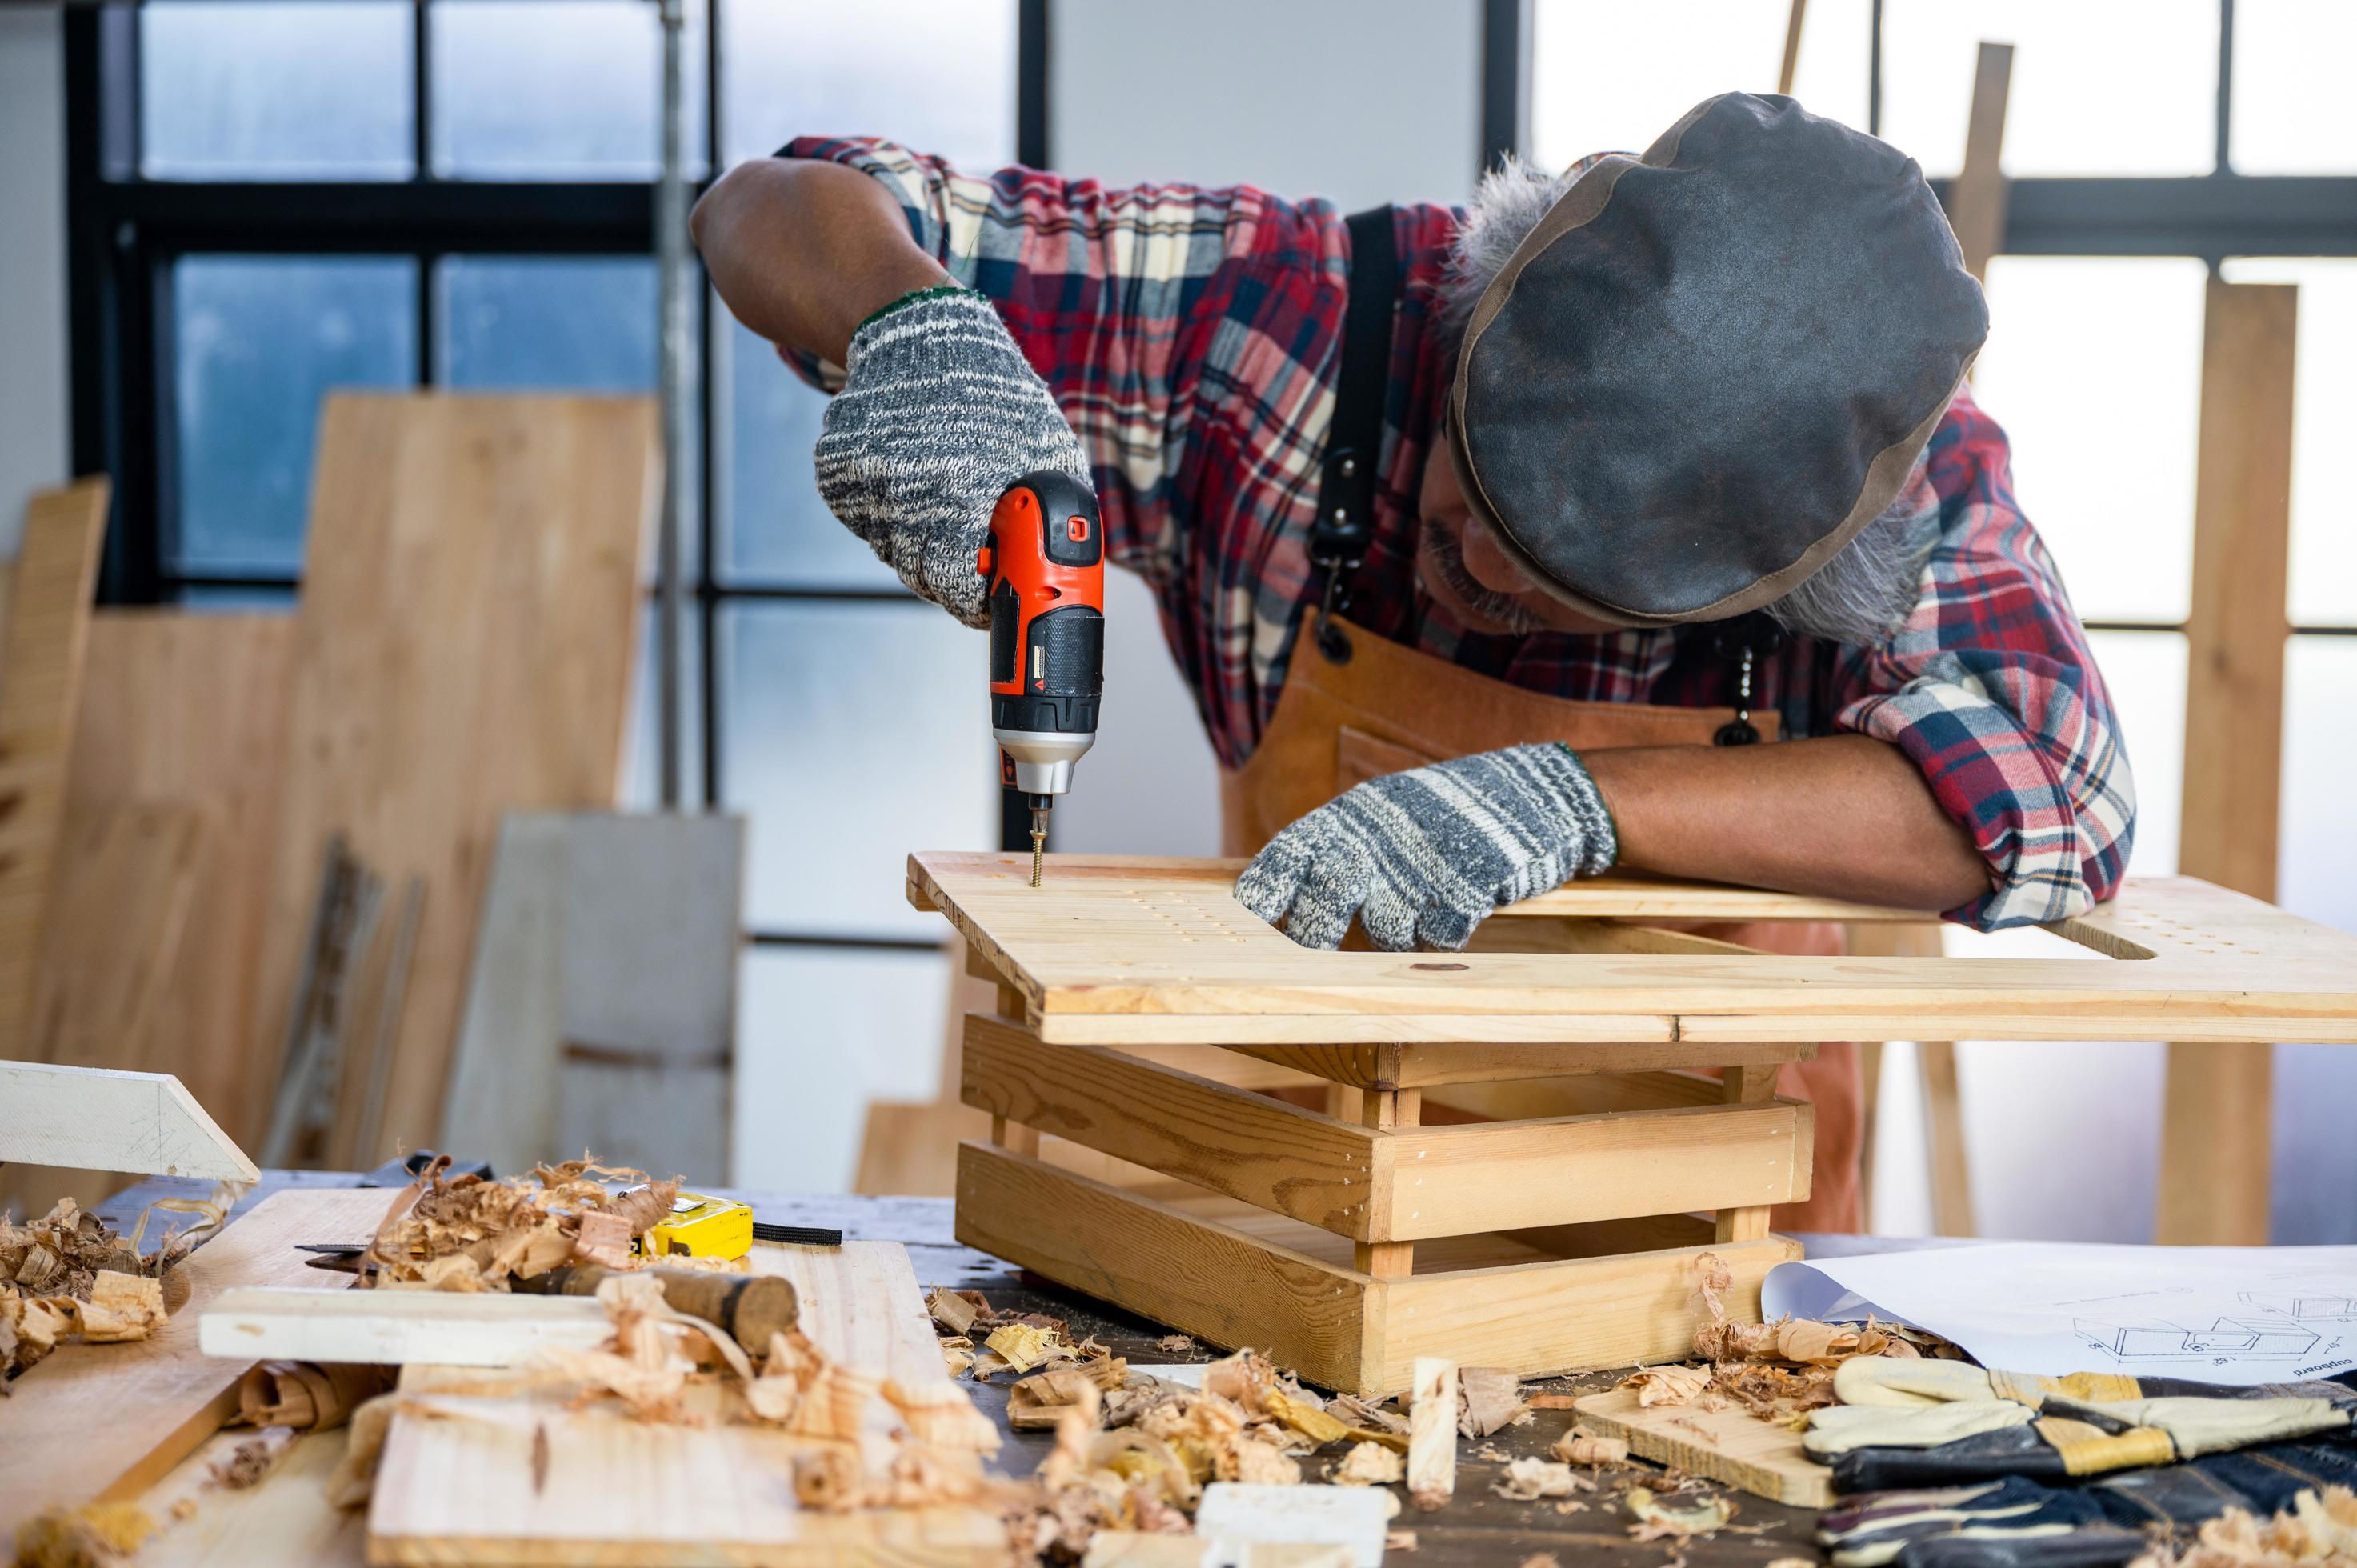 Professional Carpenter Man Working With Woodwork Industry Tool Construction Craftsman Person Workshop With Timber And Equipment Wood Work 2387457 Stock Photo At Vecteezy